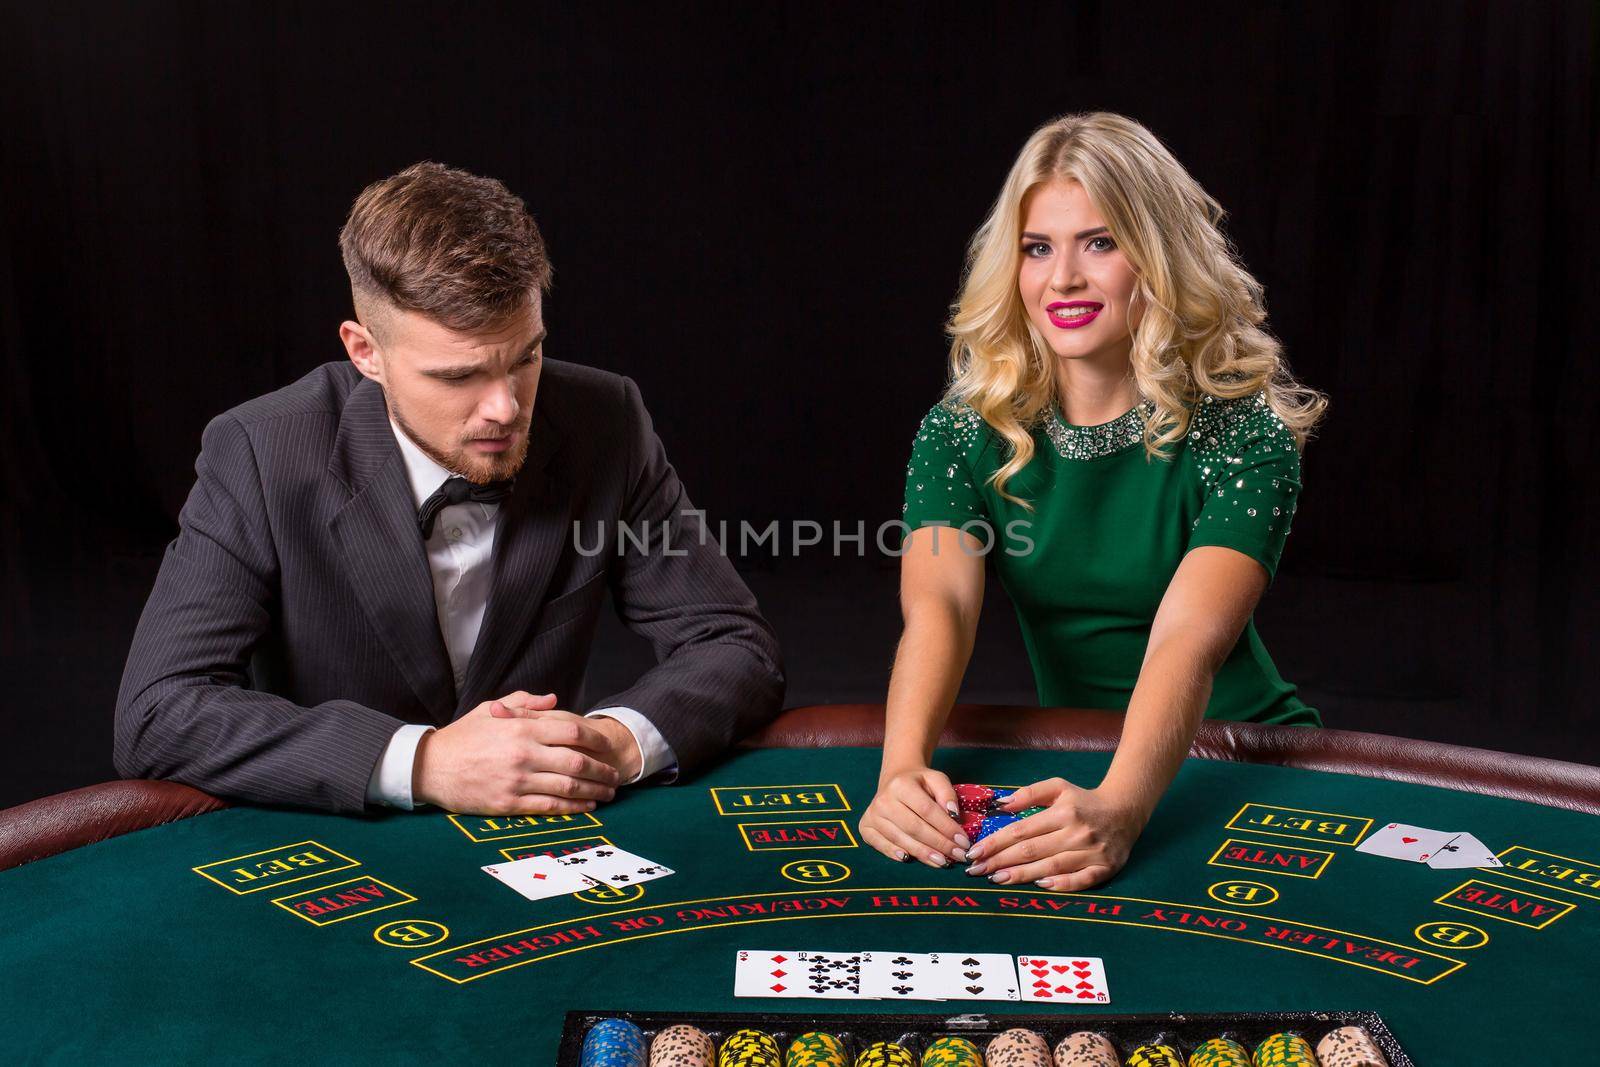 couple playing poker at the table. by nazarovsergey